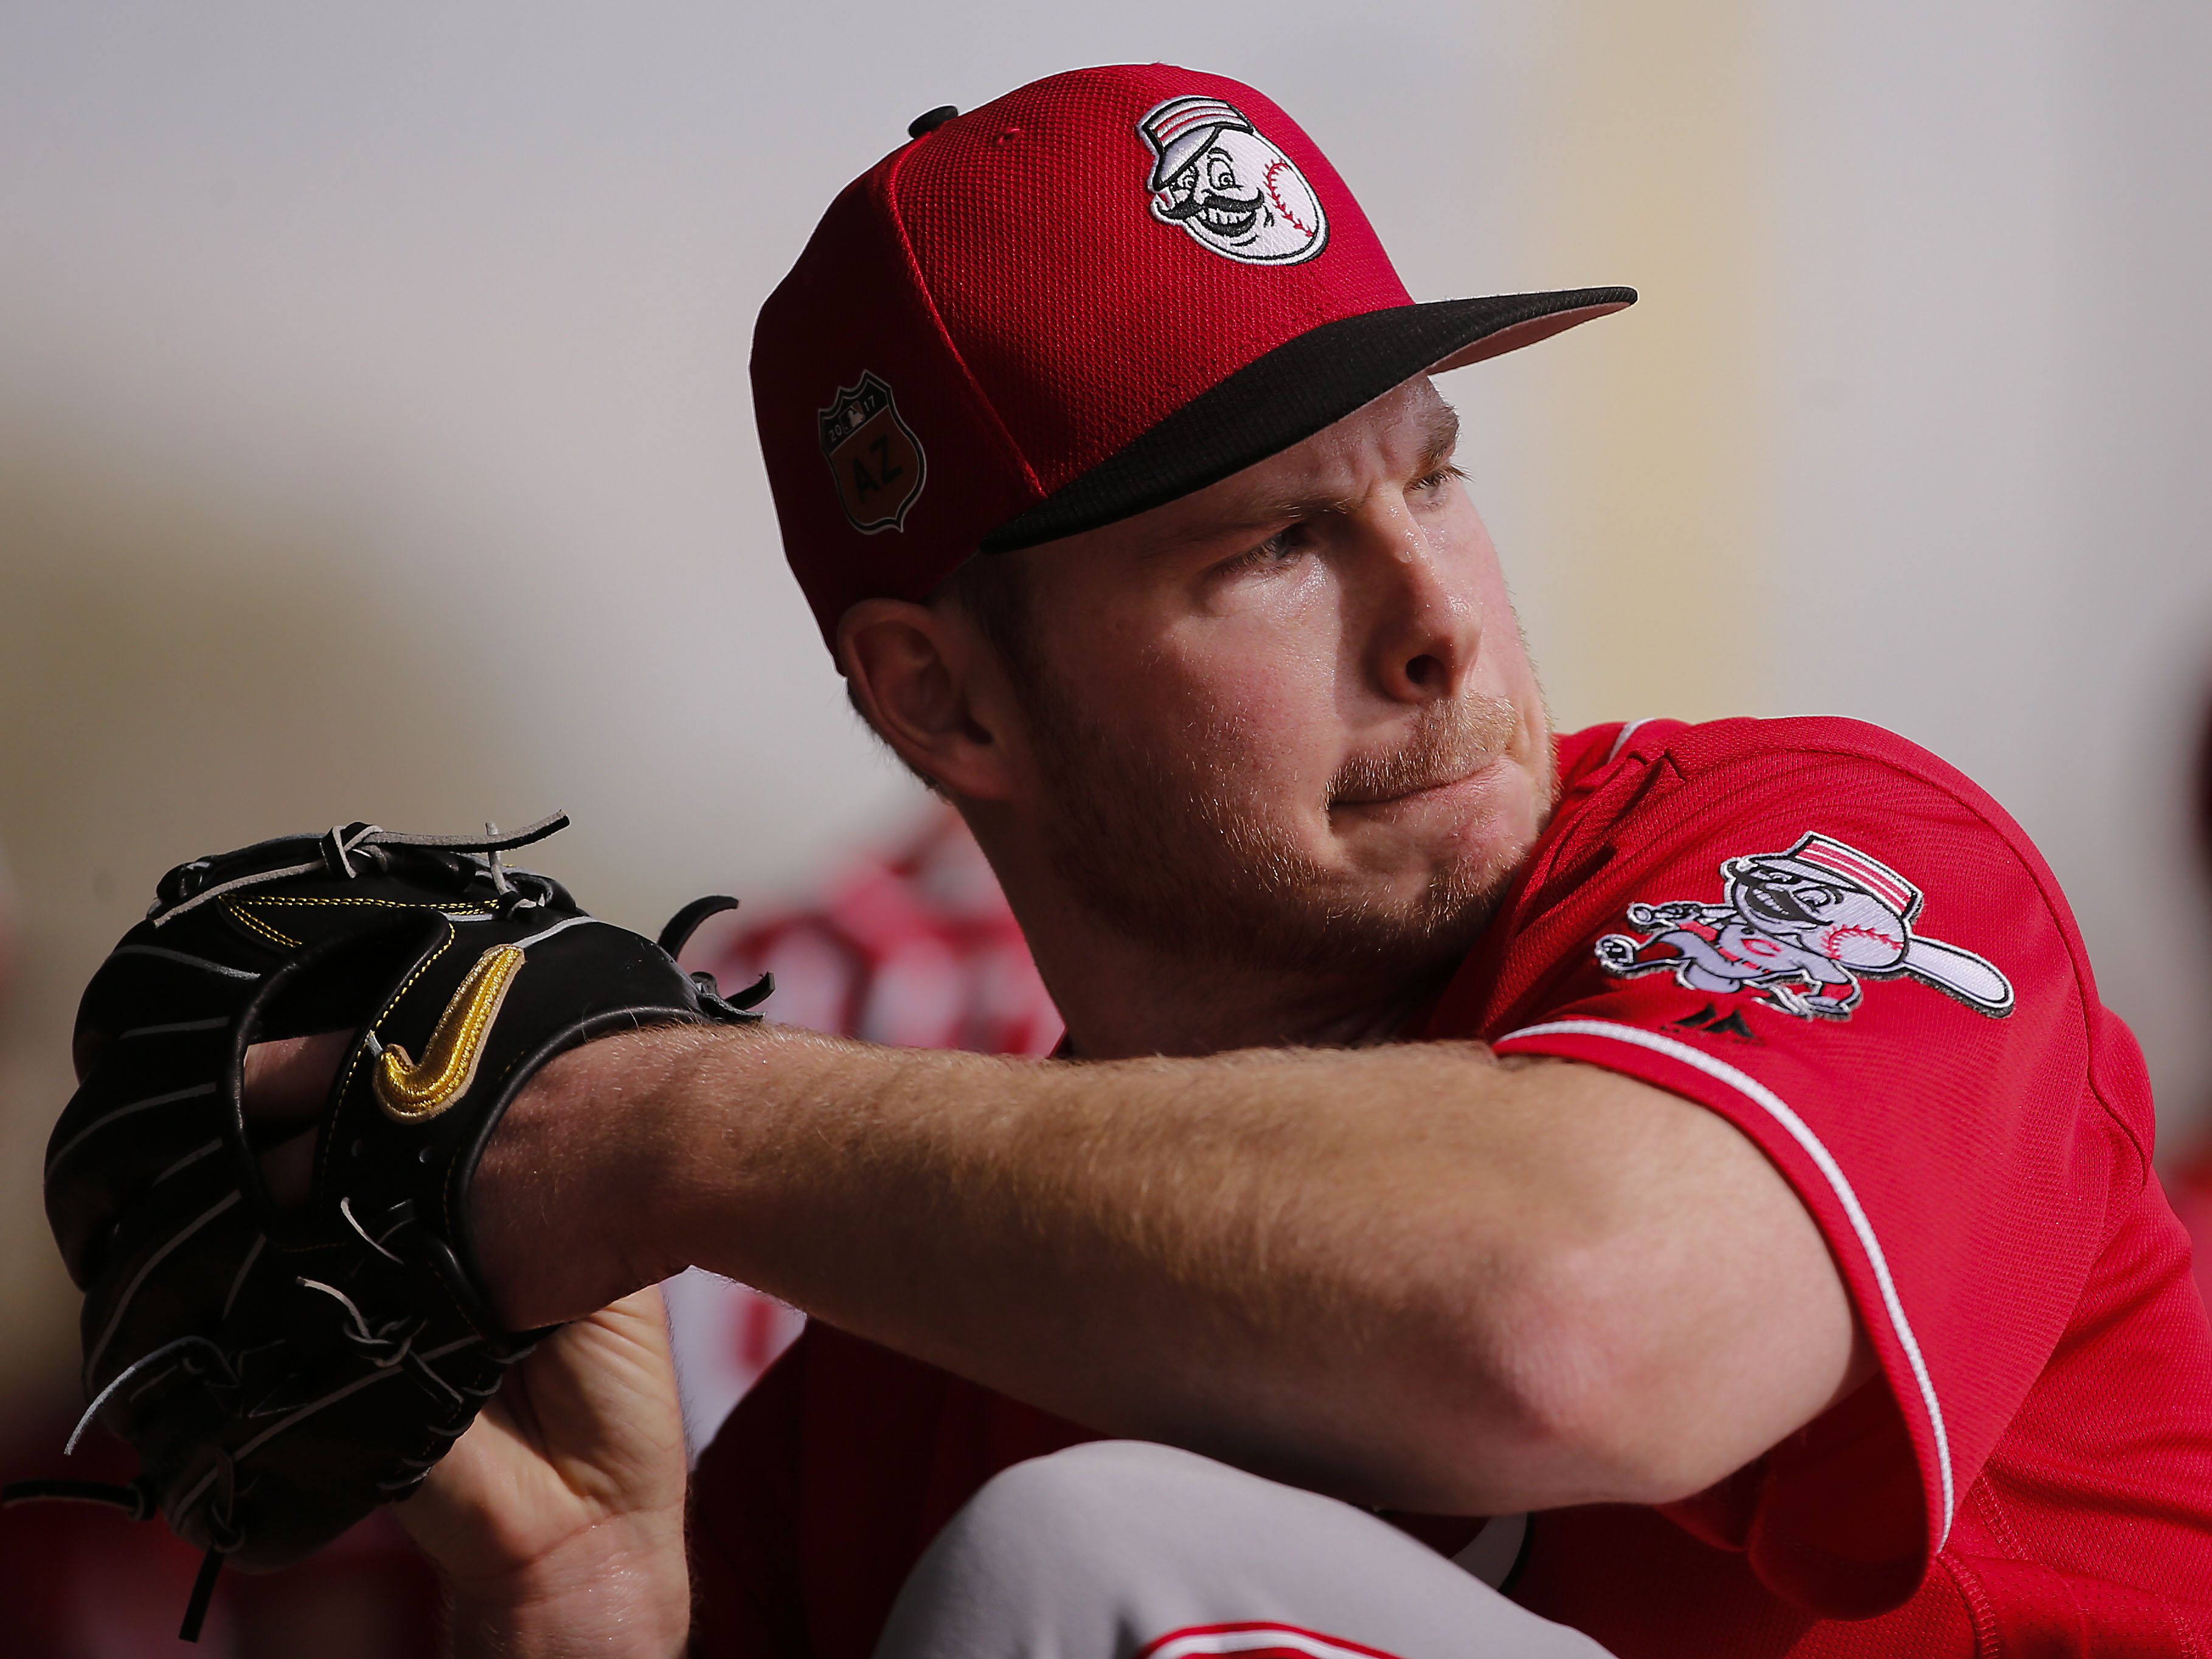 Cincinnati Reds Spring Training Preview – Is there any move that they should have made that they didn't? - My Cincinnati Reds Blog (blog)